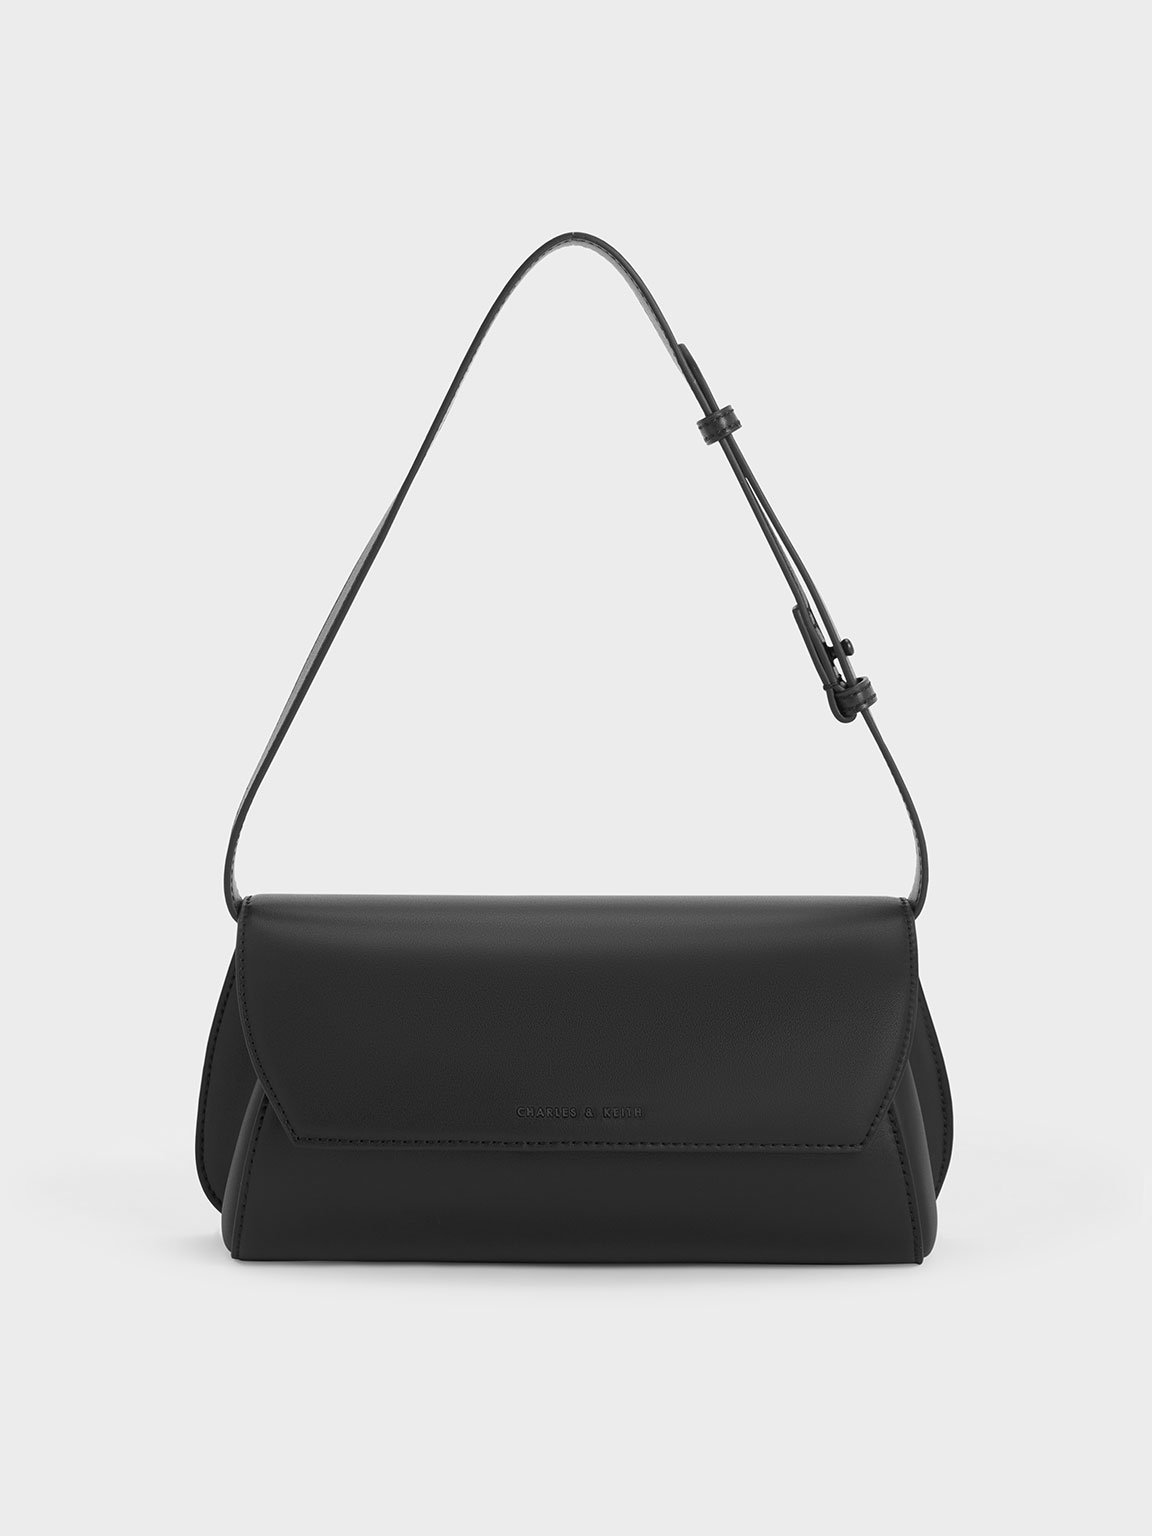 Black Cassiopeia Front Flap Shoulder Bag - CHARLES & KEITH PH